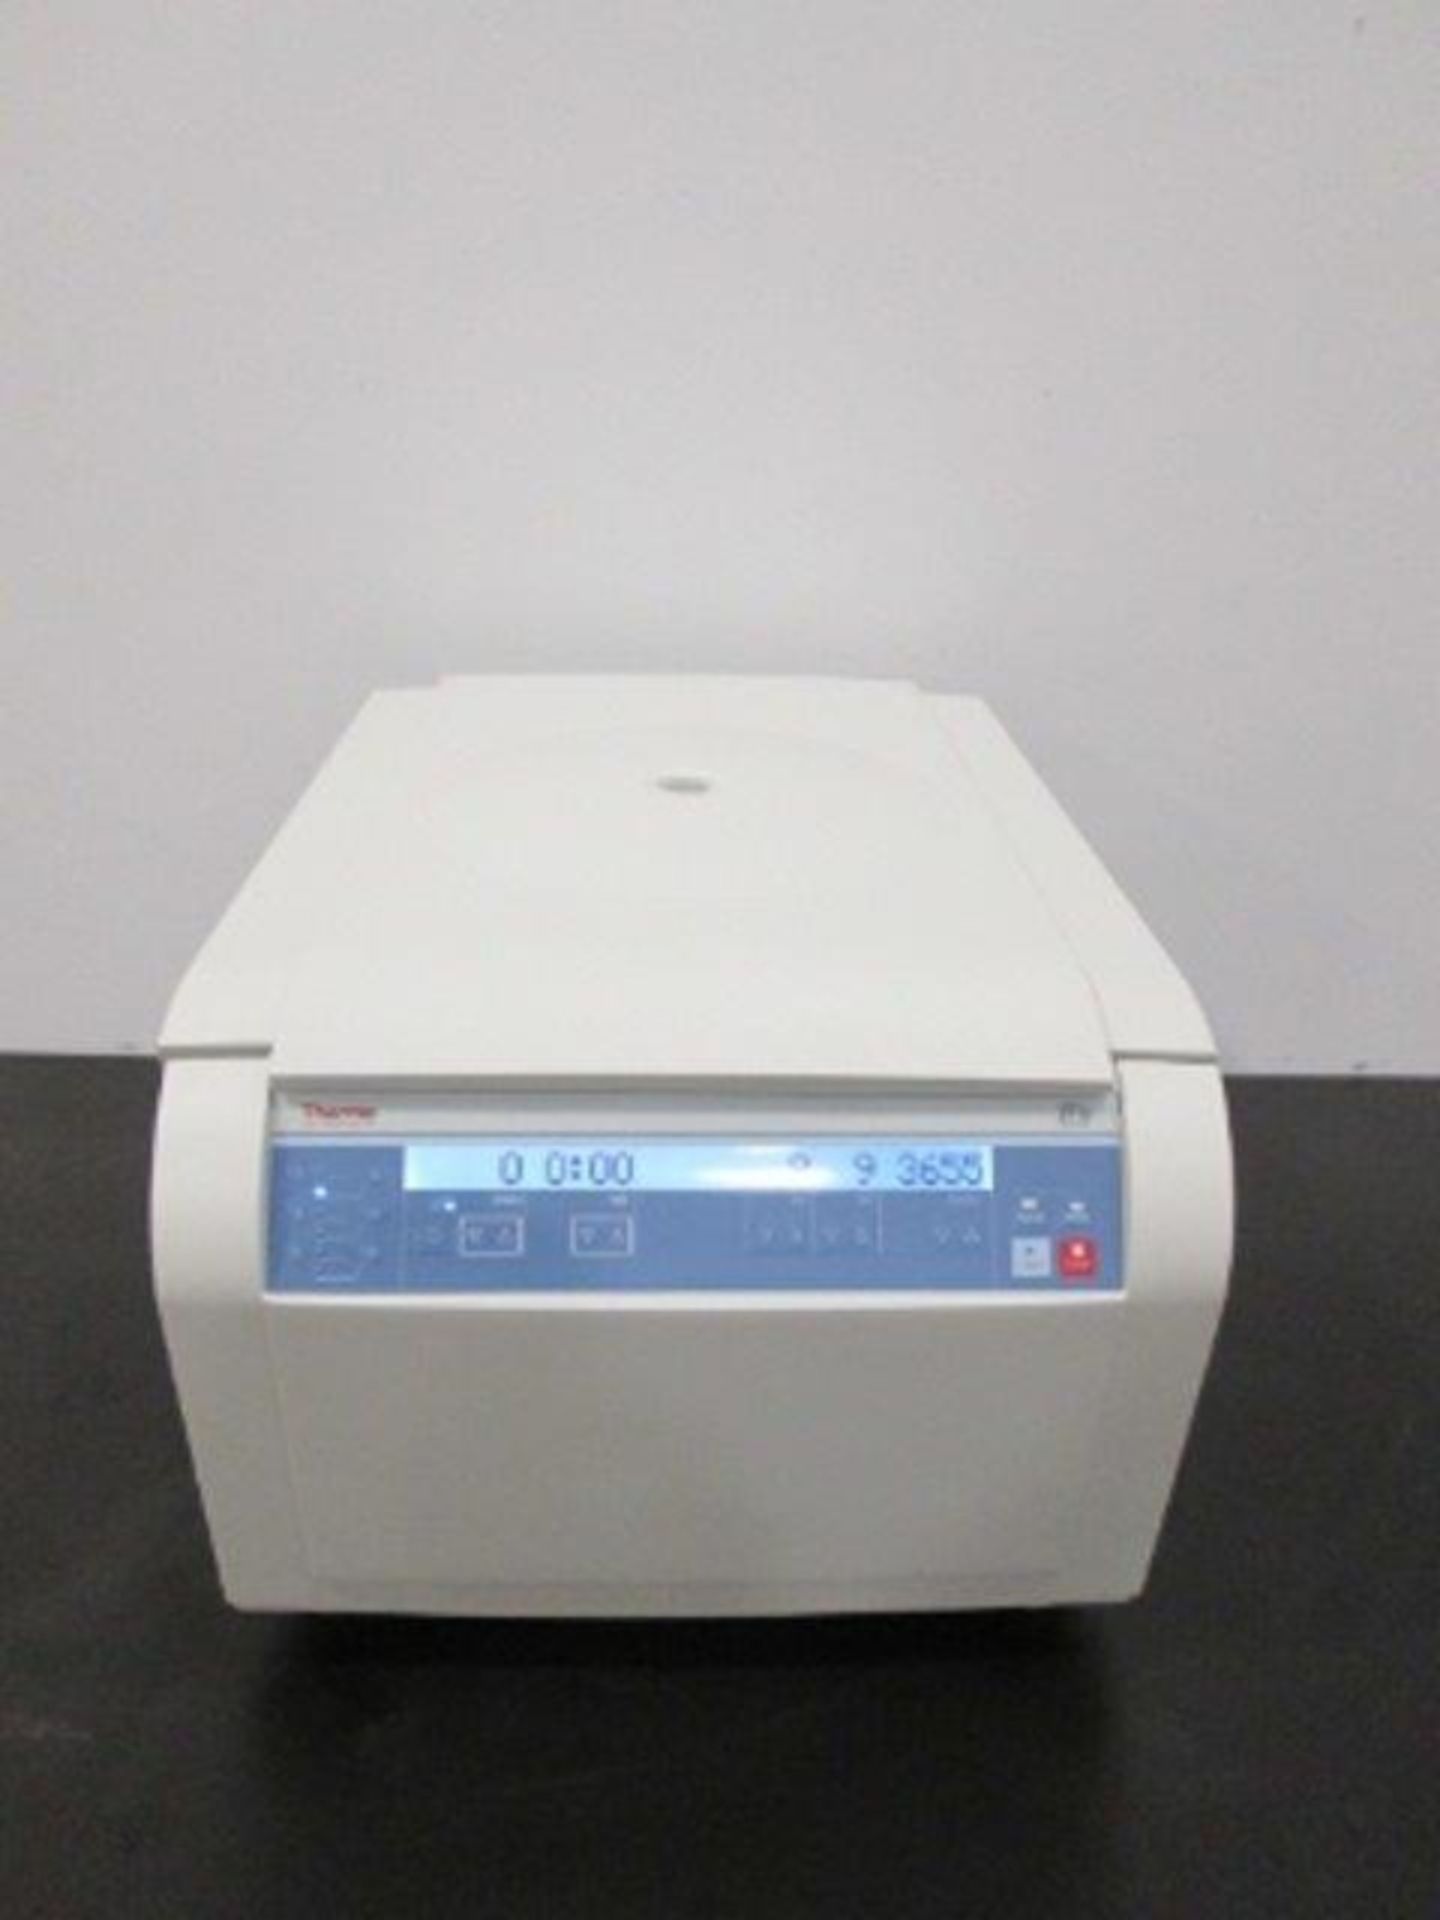 Thermo Scientific Sorvall ST-16 Refurbished Centrifuge